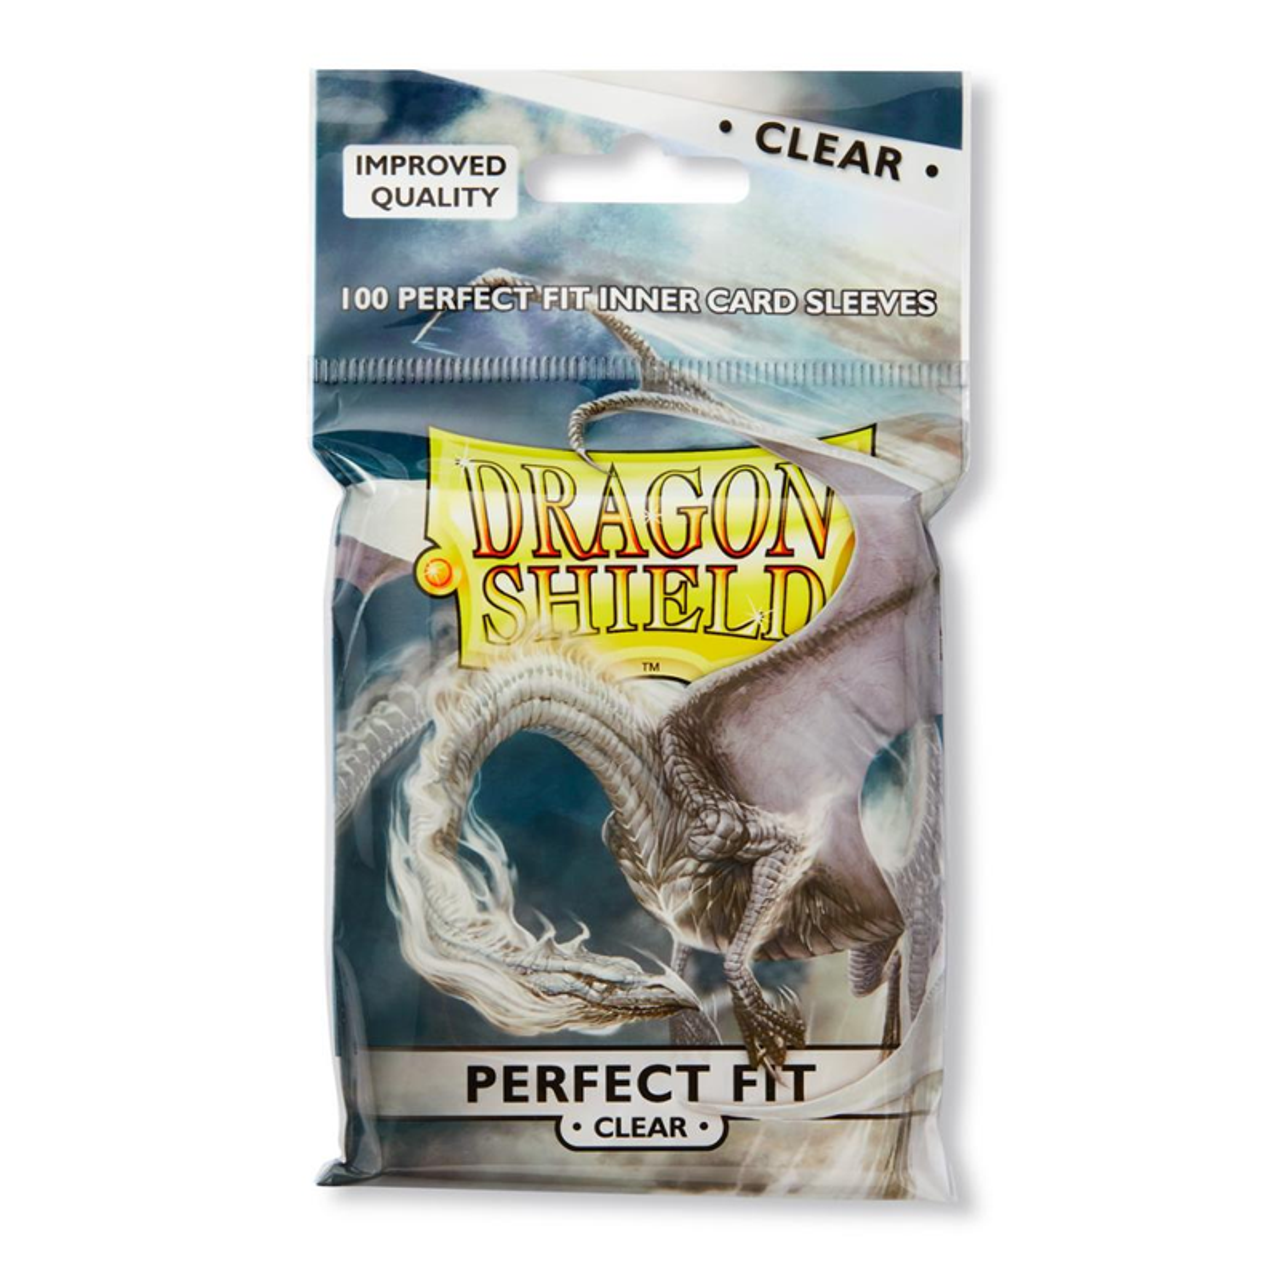 Dragon Shield PERFECT FIT SEALABLE Standard Size Card Sleeves